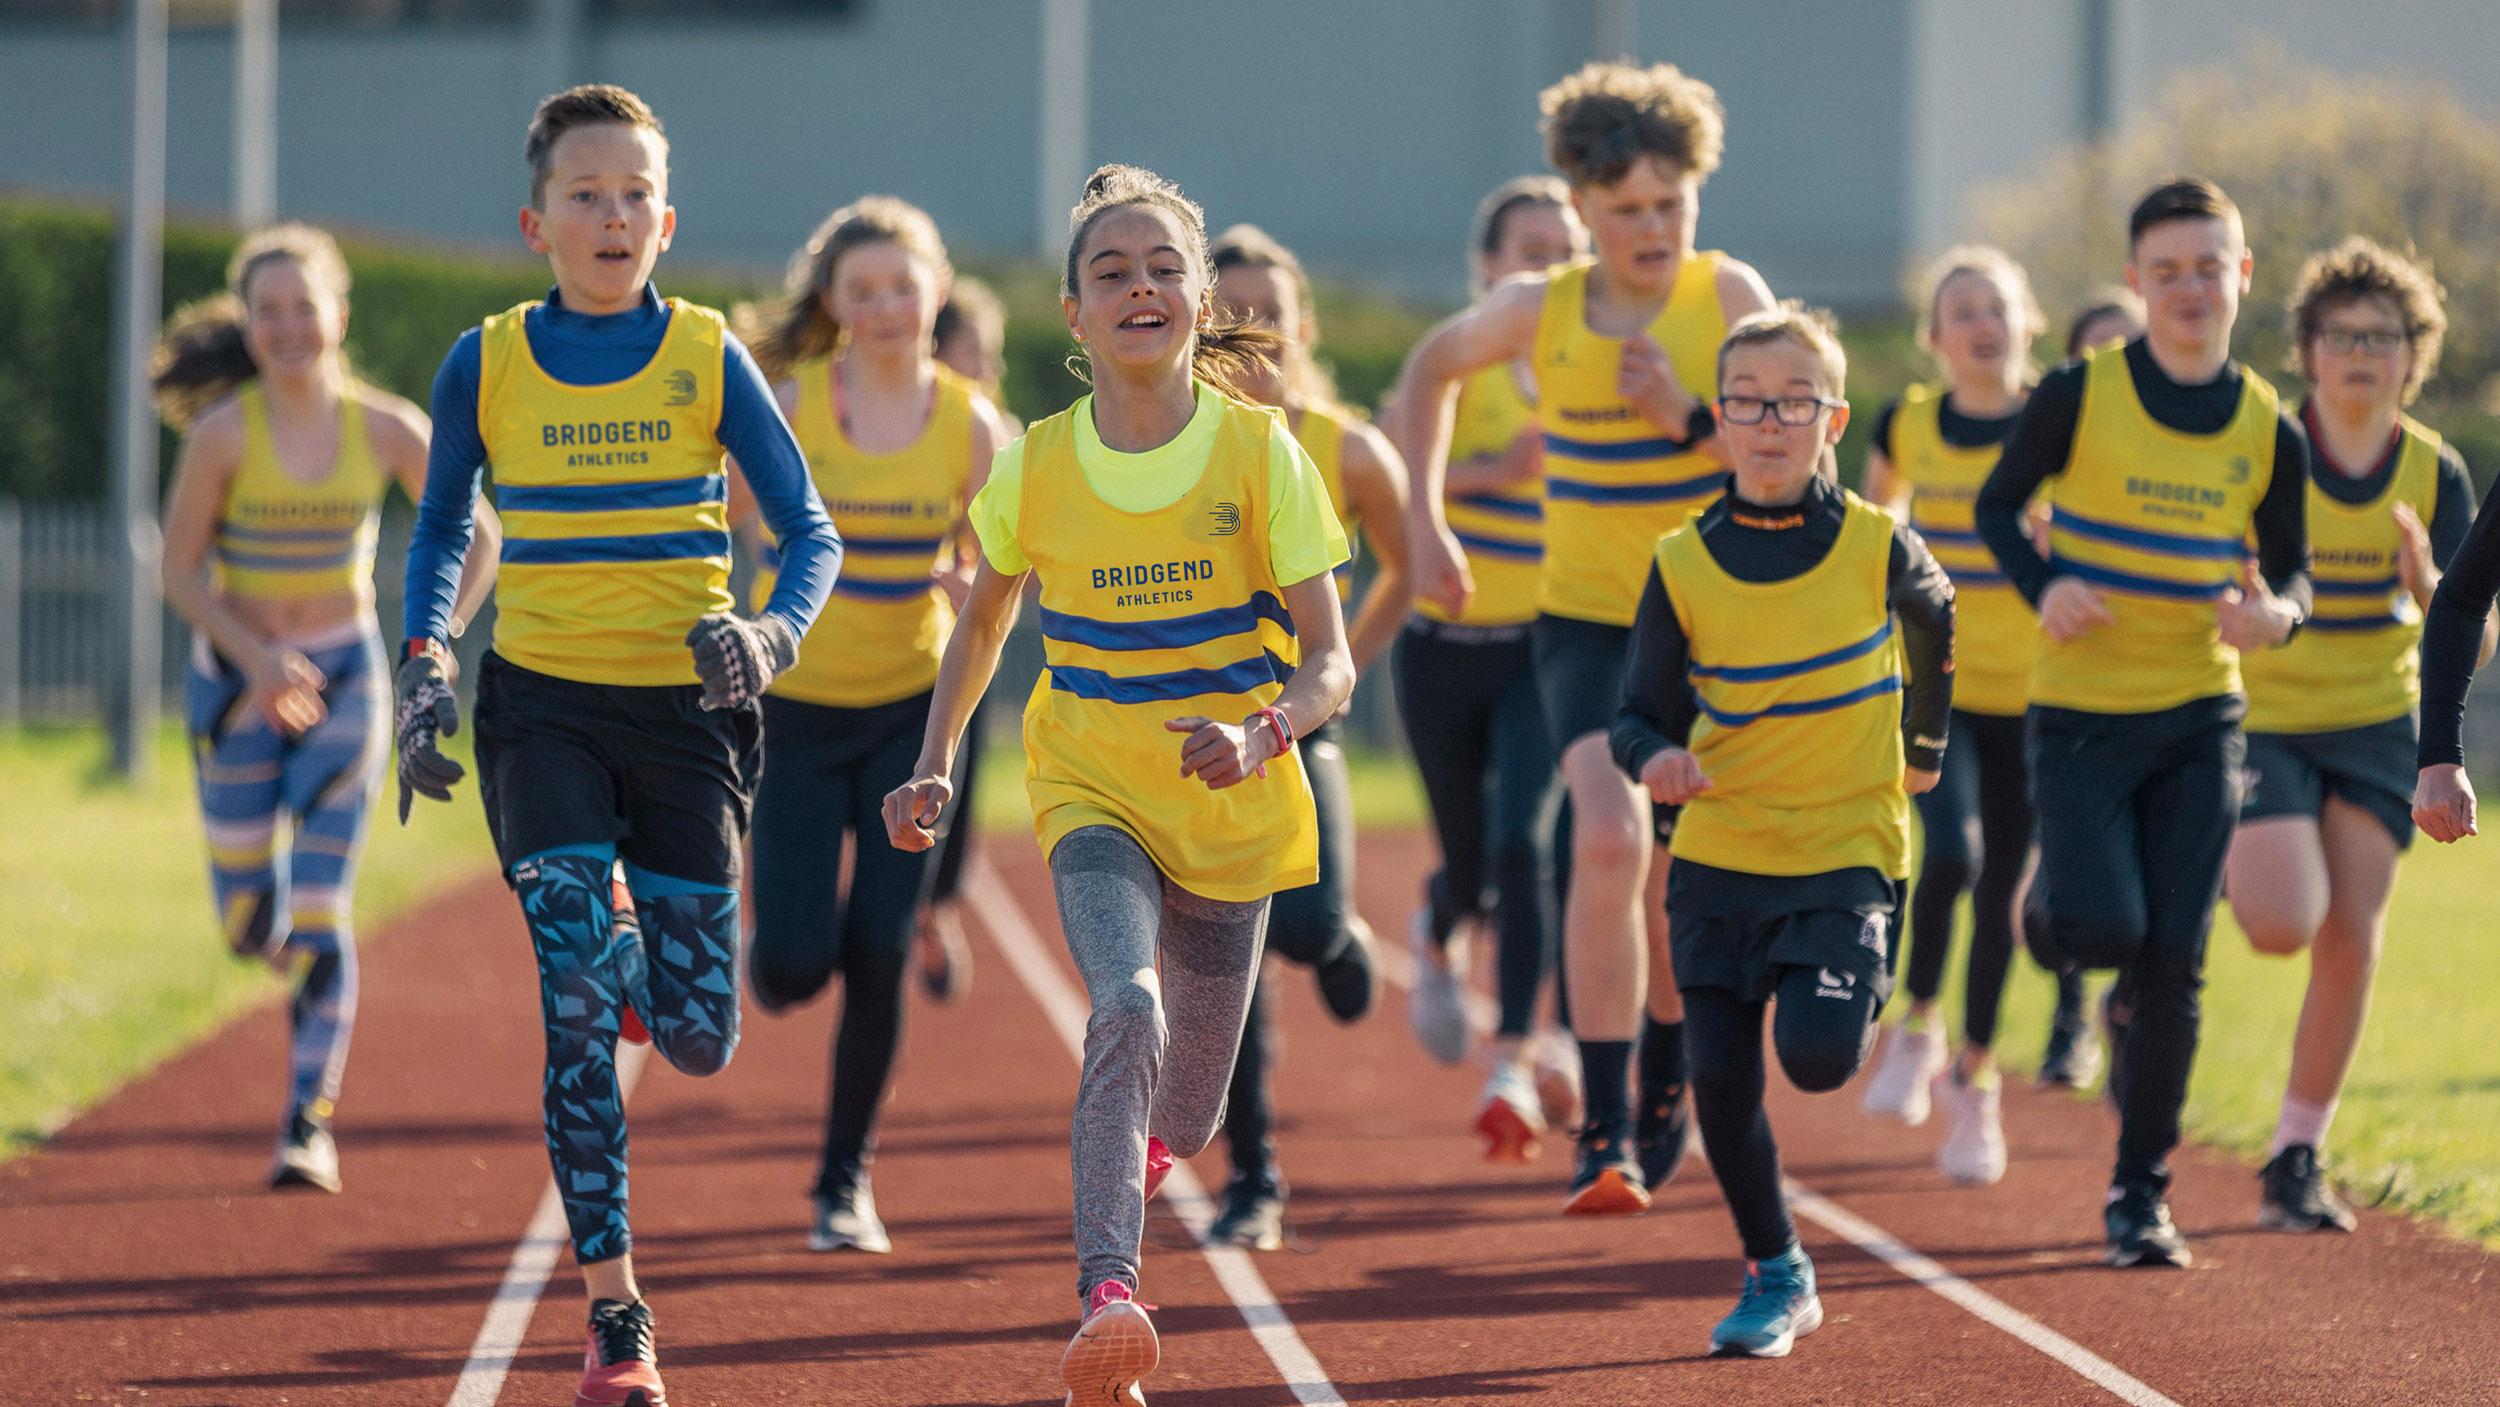 Photo of junior athletes wearing branded athletic club vests sprinting on running track